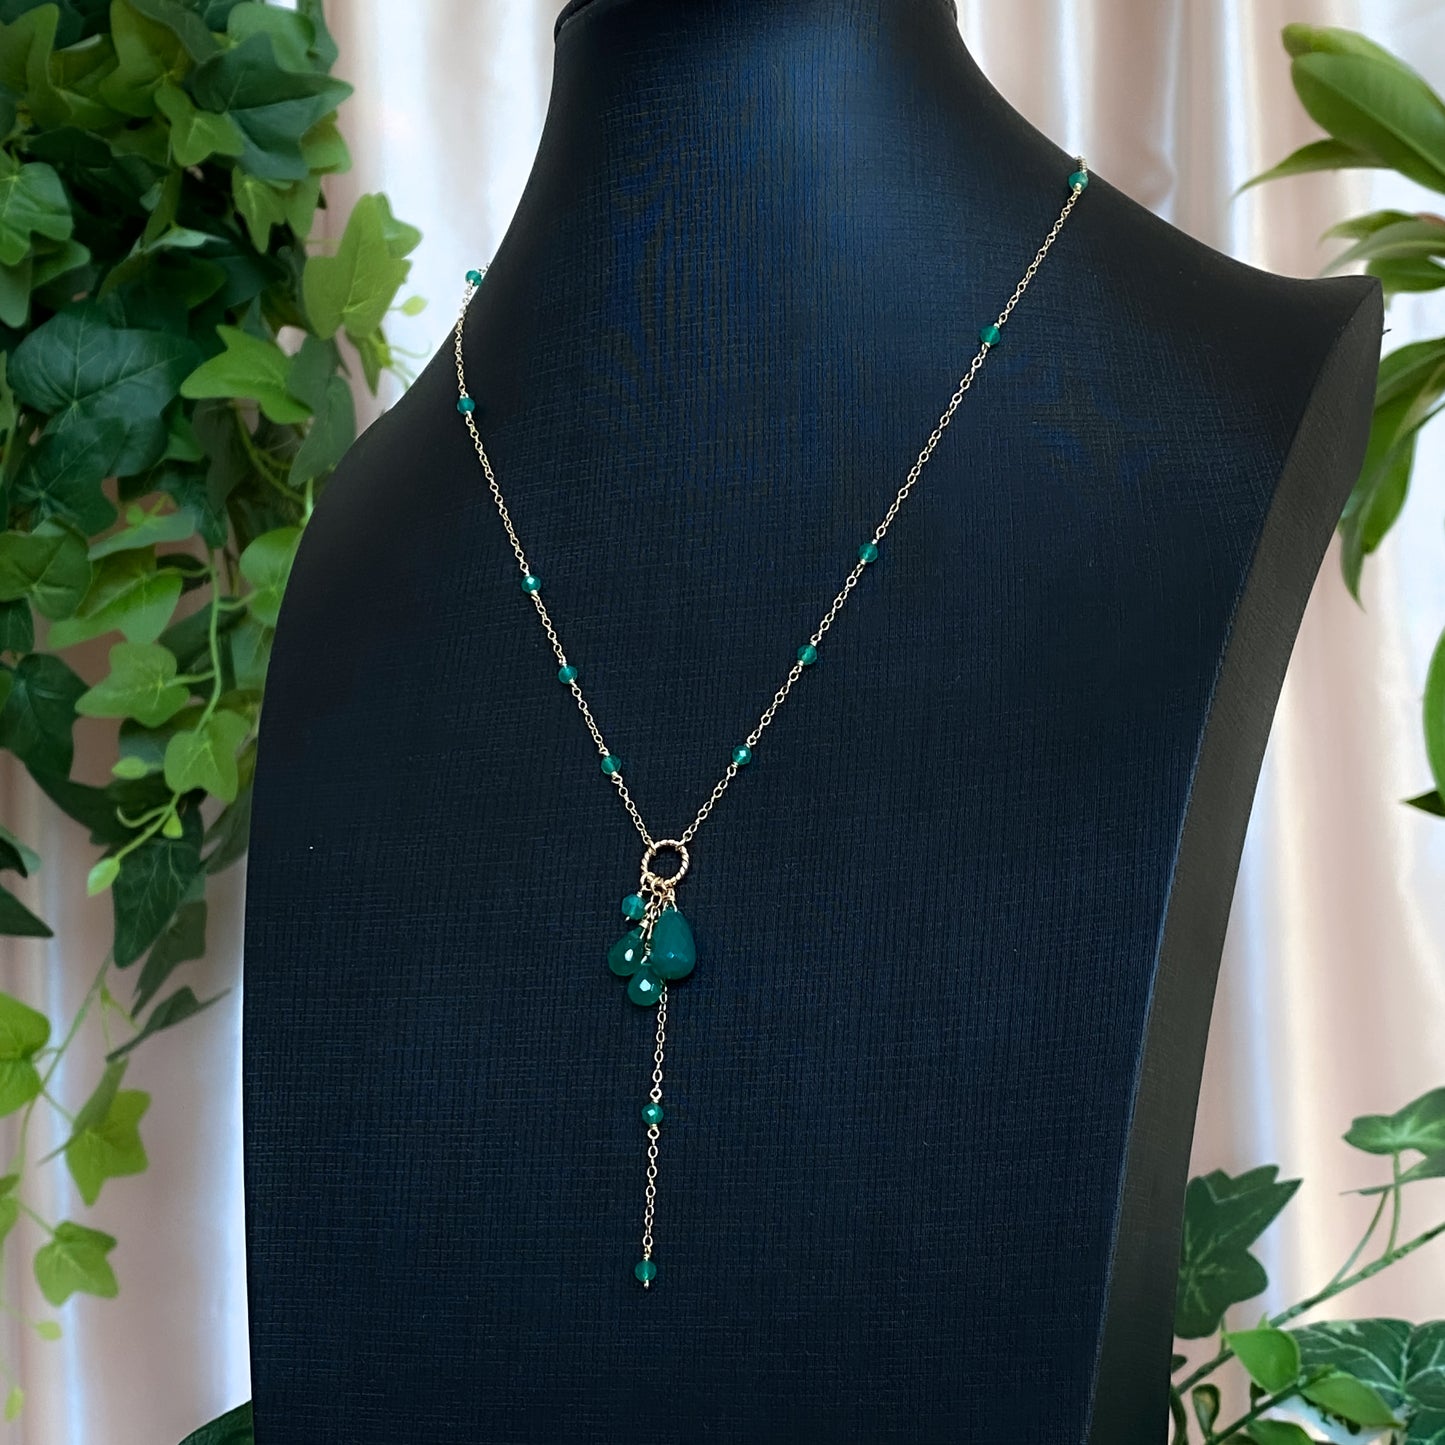 Daphne ~ Green Onyx and 14k Gold Filled Charm Necklace